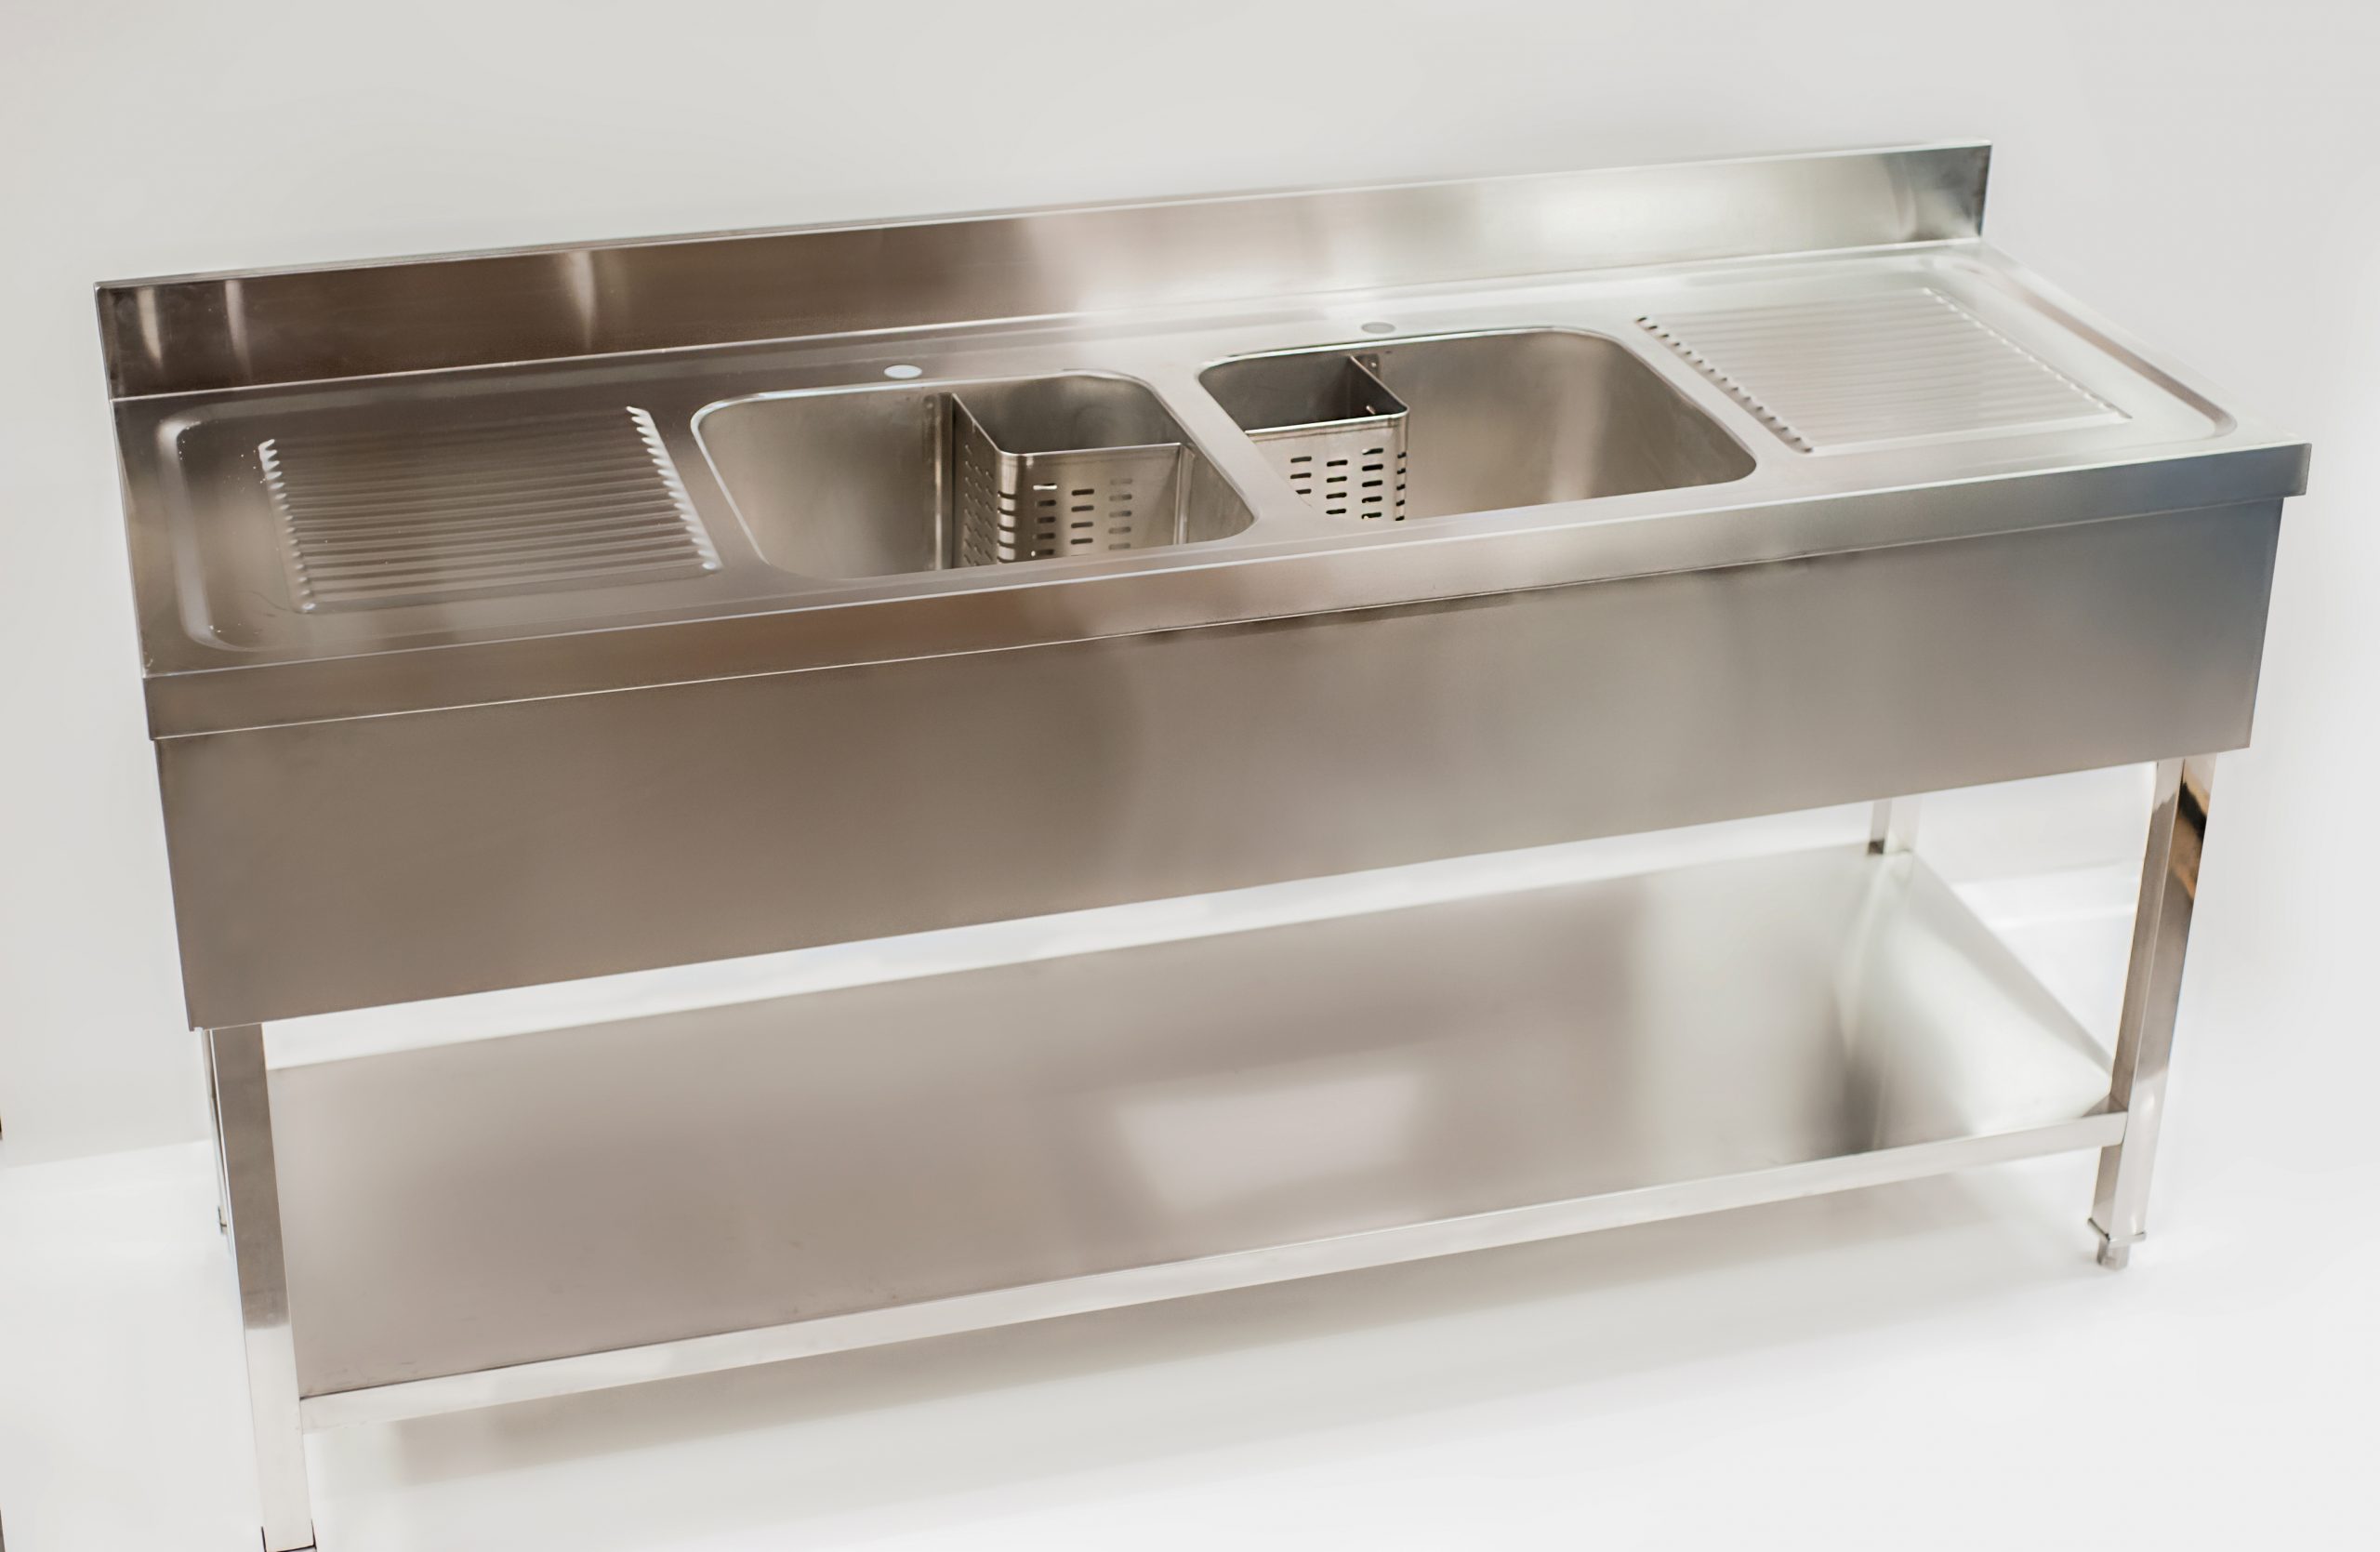 Double bowl catering sink